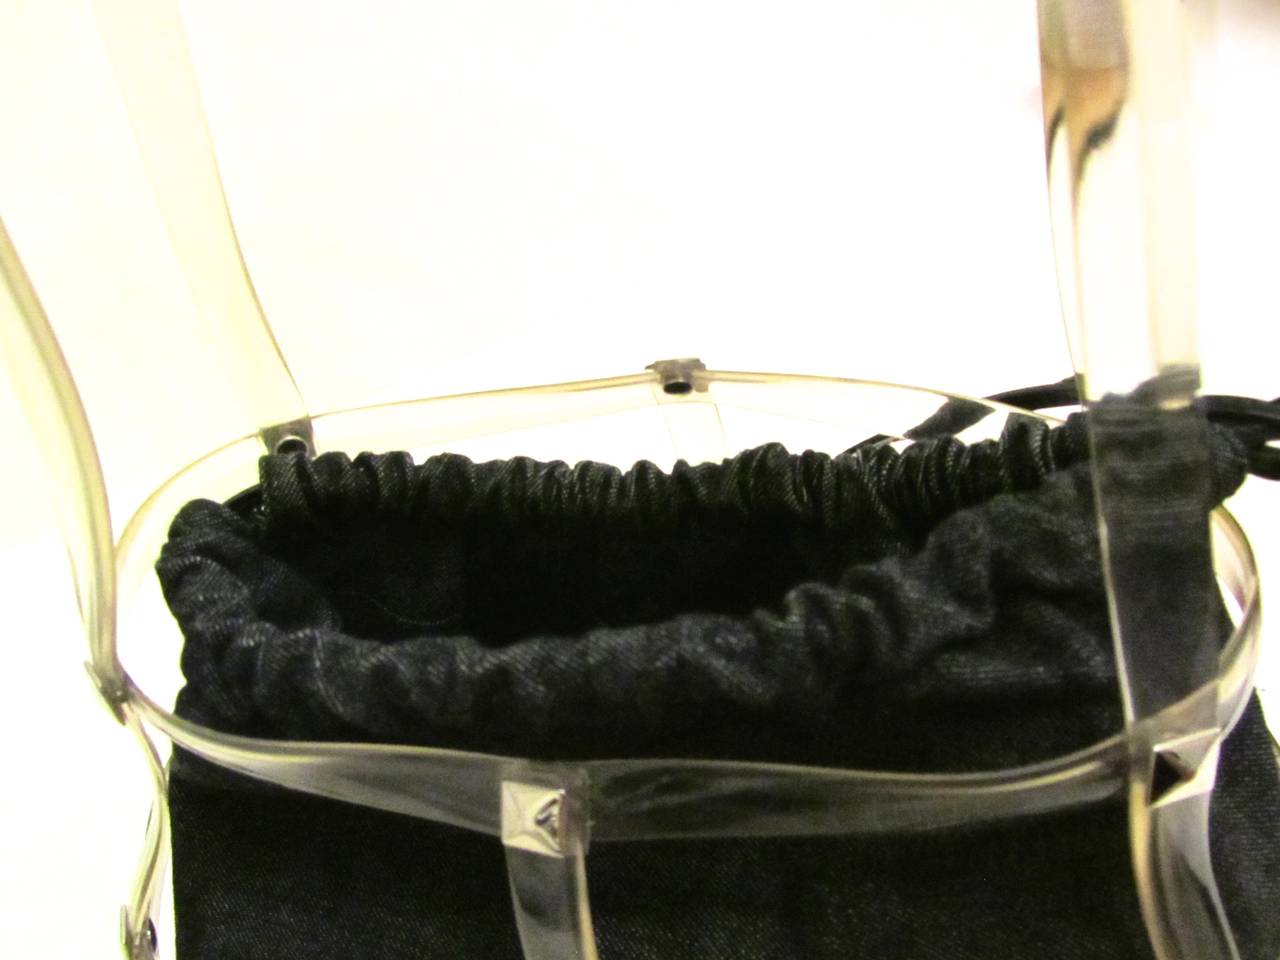 1980s Paco Rabanne Denim and Clear Plastic Handbag - Drawstring Pouch In Excellent Condition For Sale In Boca Raton, FL